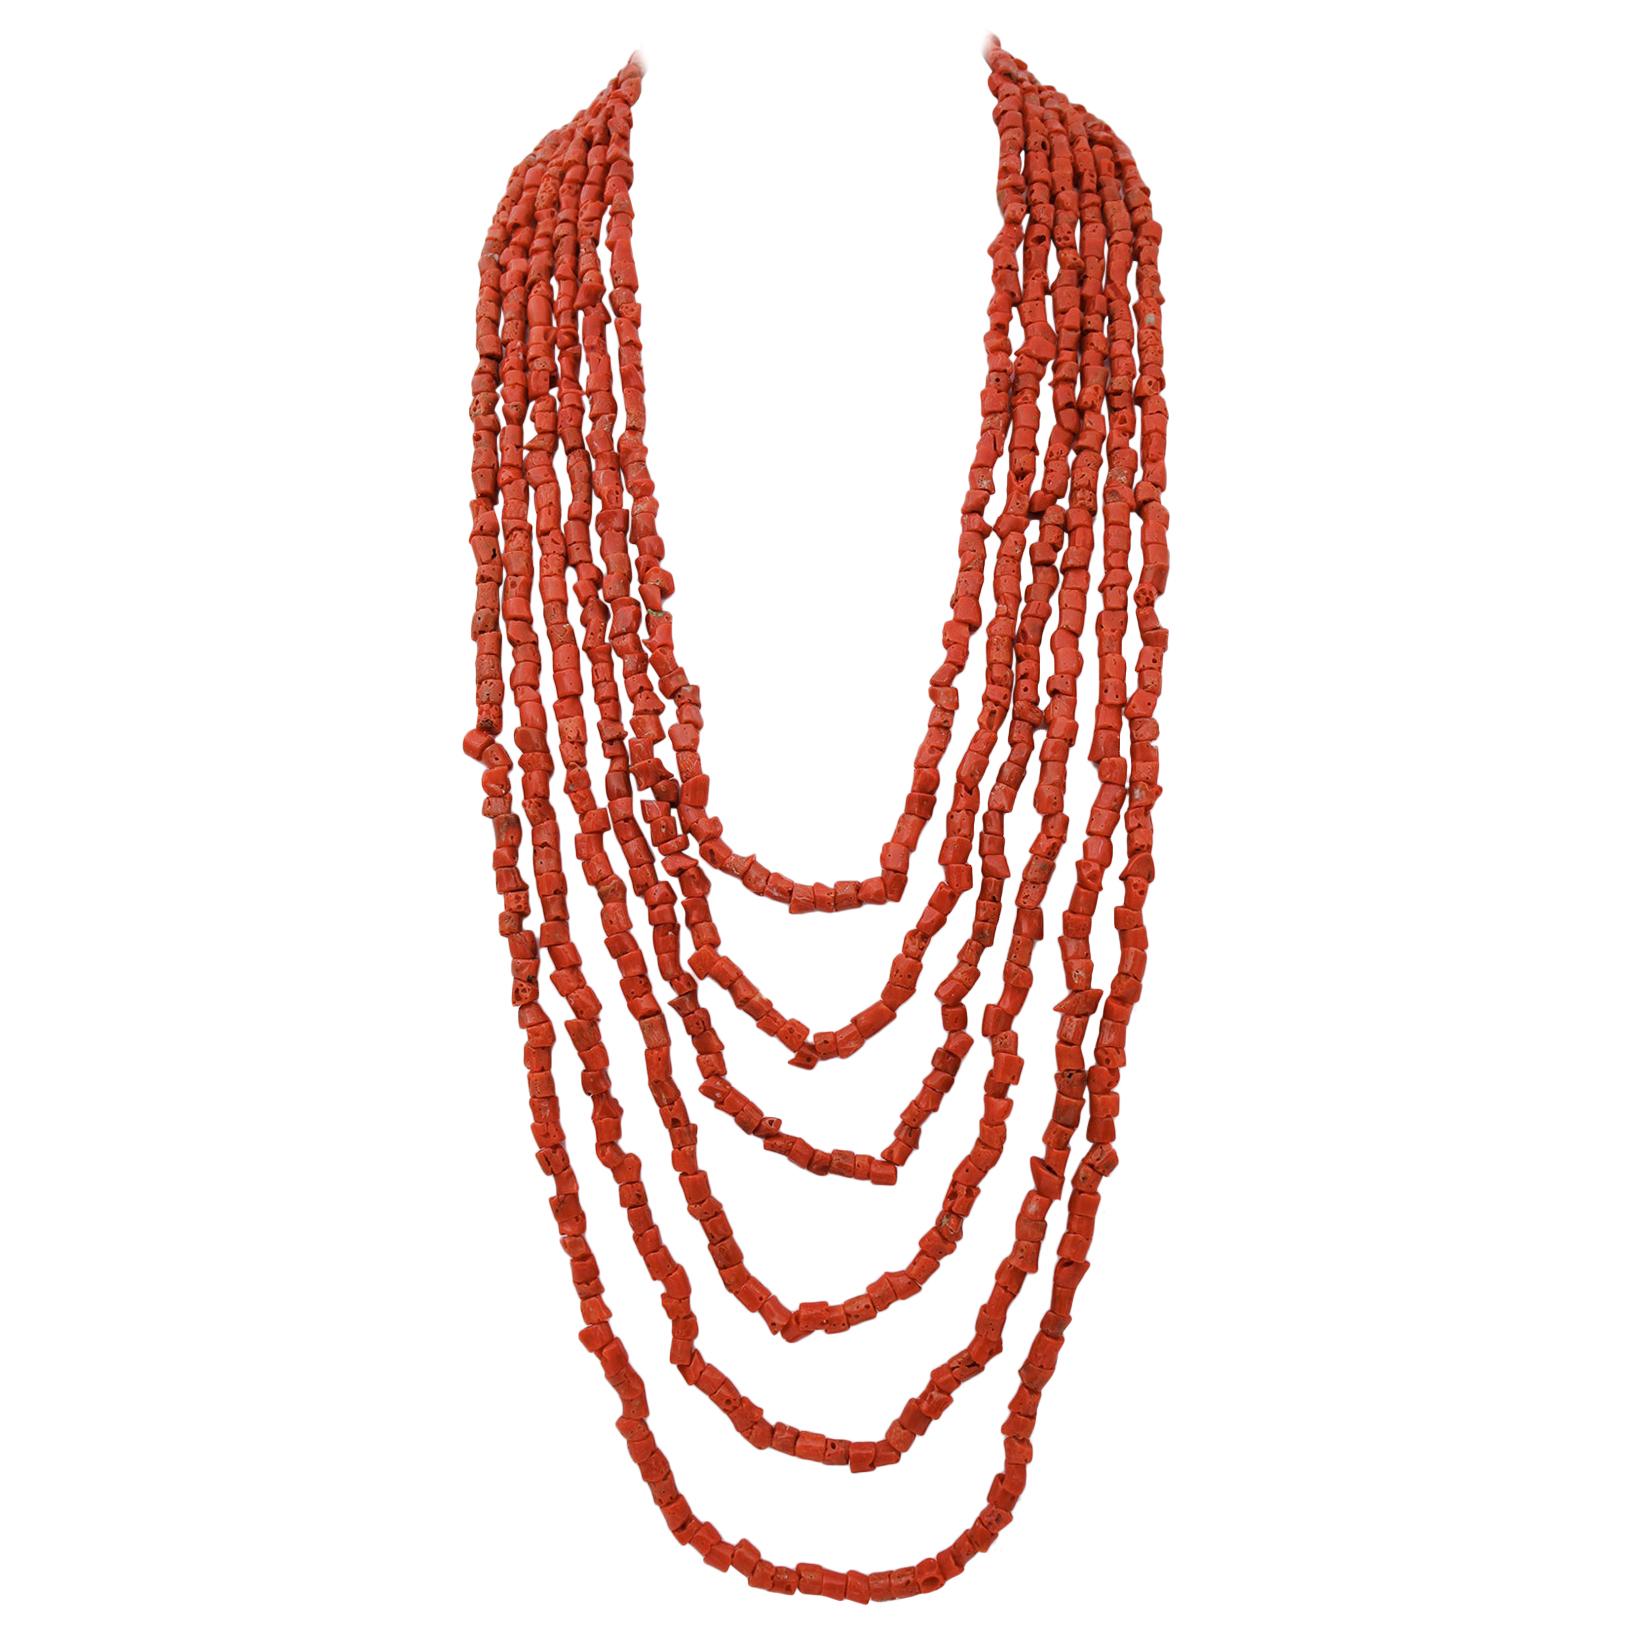 Diamonds, Topaz, Coral, Pearls, 9 Karat Gold and Silver Multi-Strands Necklace